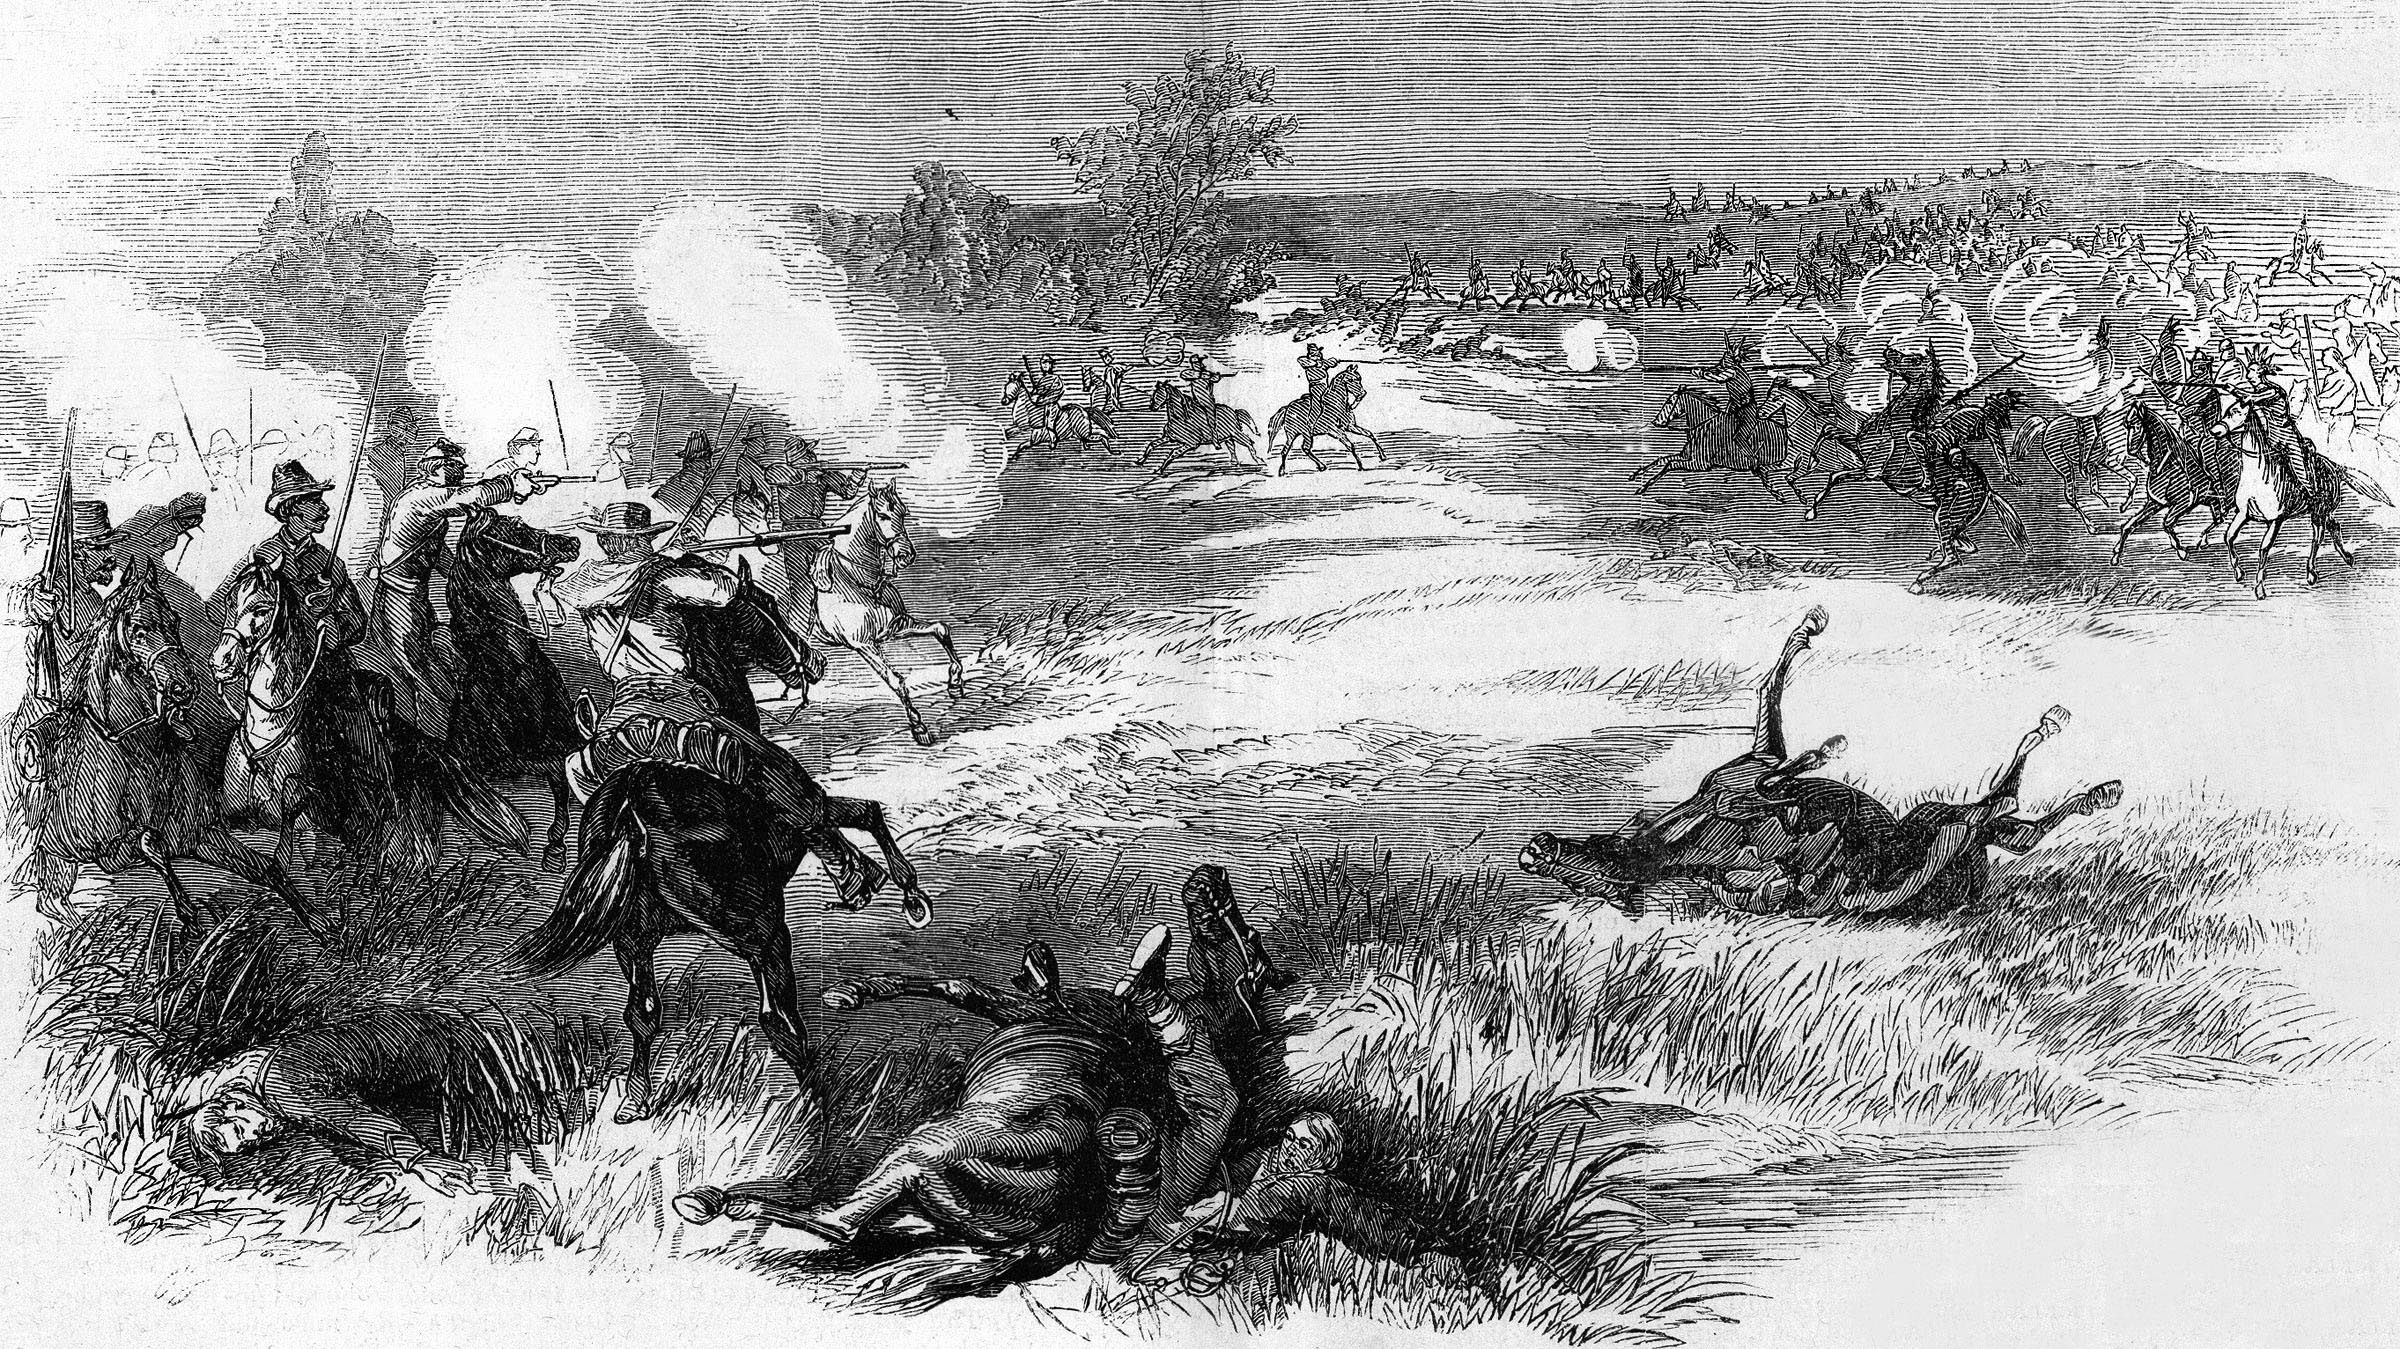 In August, 1840, Chief Buffalo Hump led a band of 500 Comanches that looted the coastal towns of Victoria and Linnville, Texas, burning the latter to the ground.  As the Comanche were heading back west, a posse of Texas Rangers and militia caught up with them as they crossed Plum Creek, near present-day Lockhart, Texas. An estimated 25-80 Comanche were killed, the rest fled to West Texas. The pursuers reported one dead, and seven wounded.